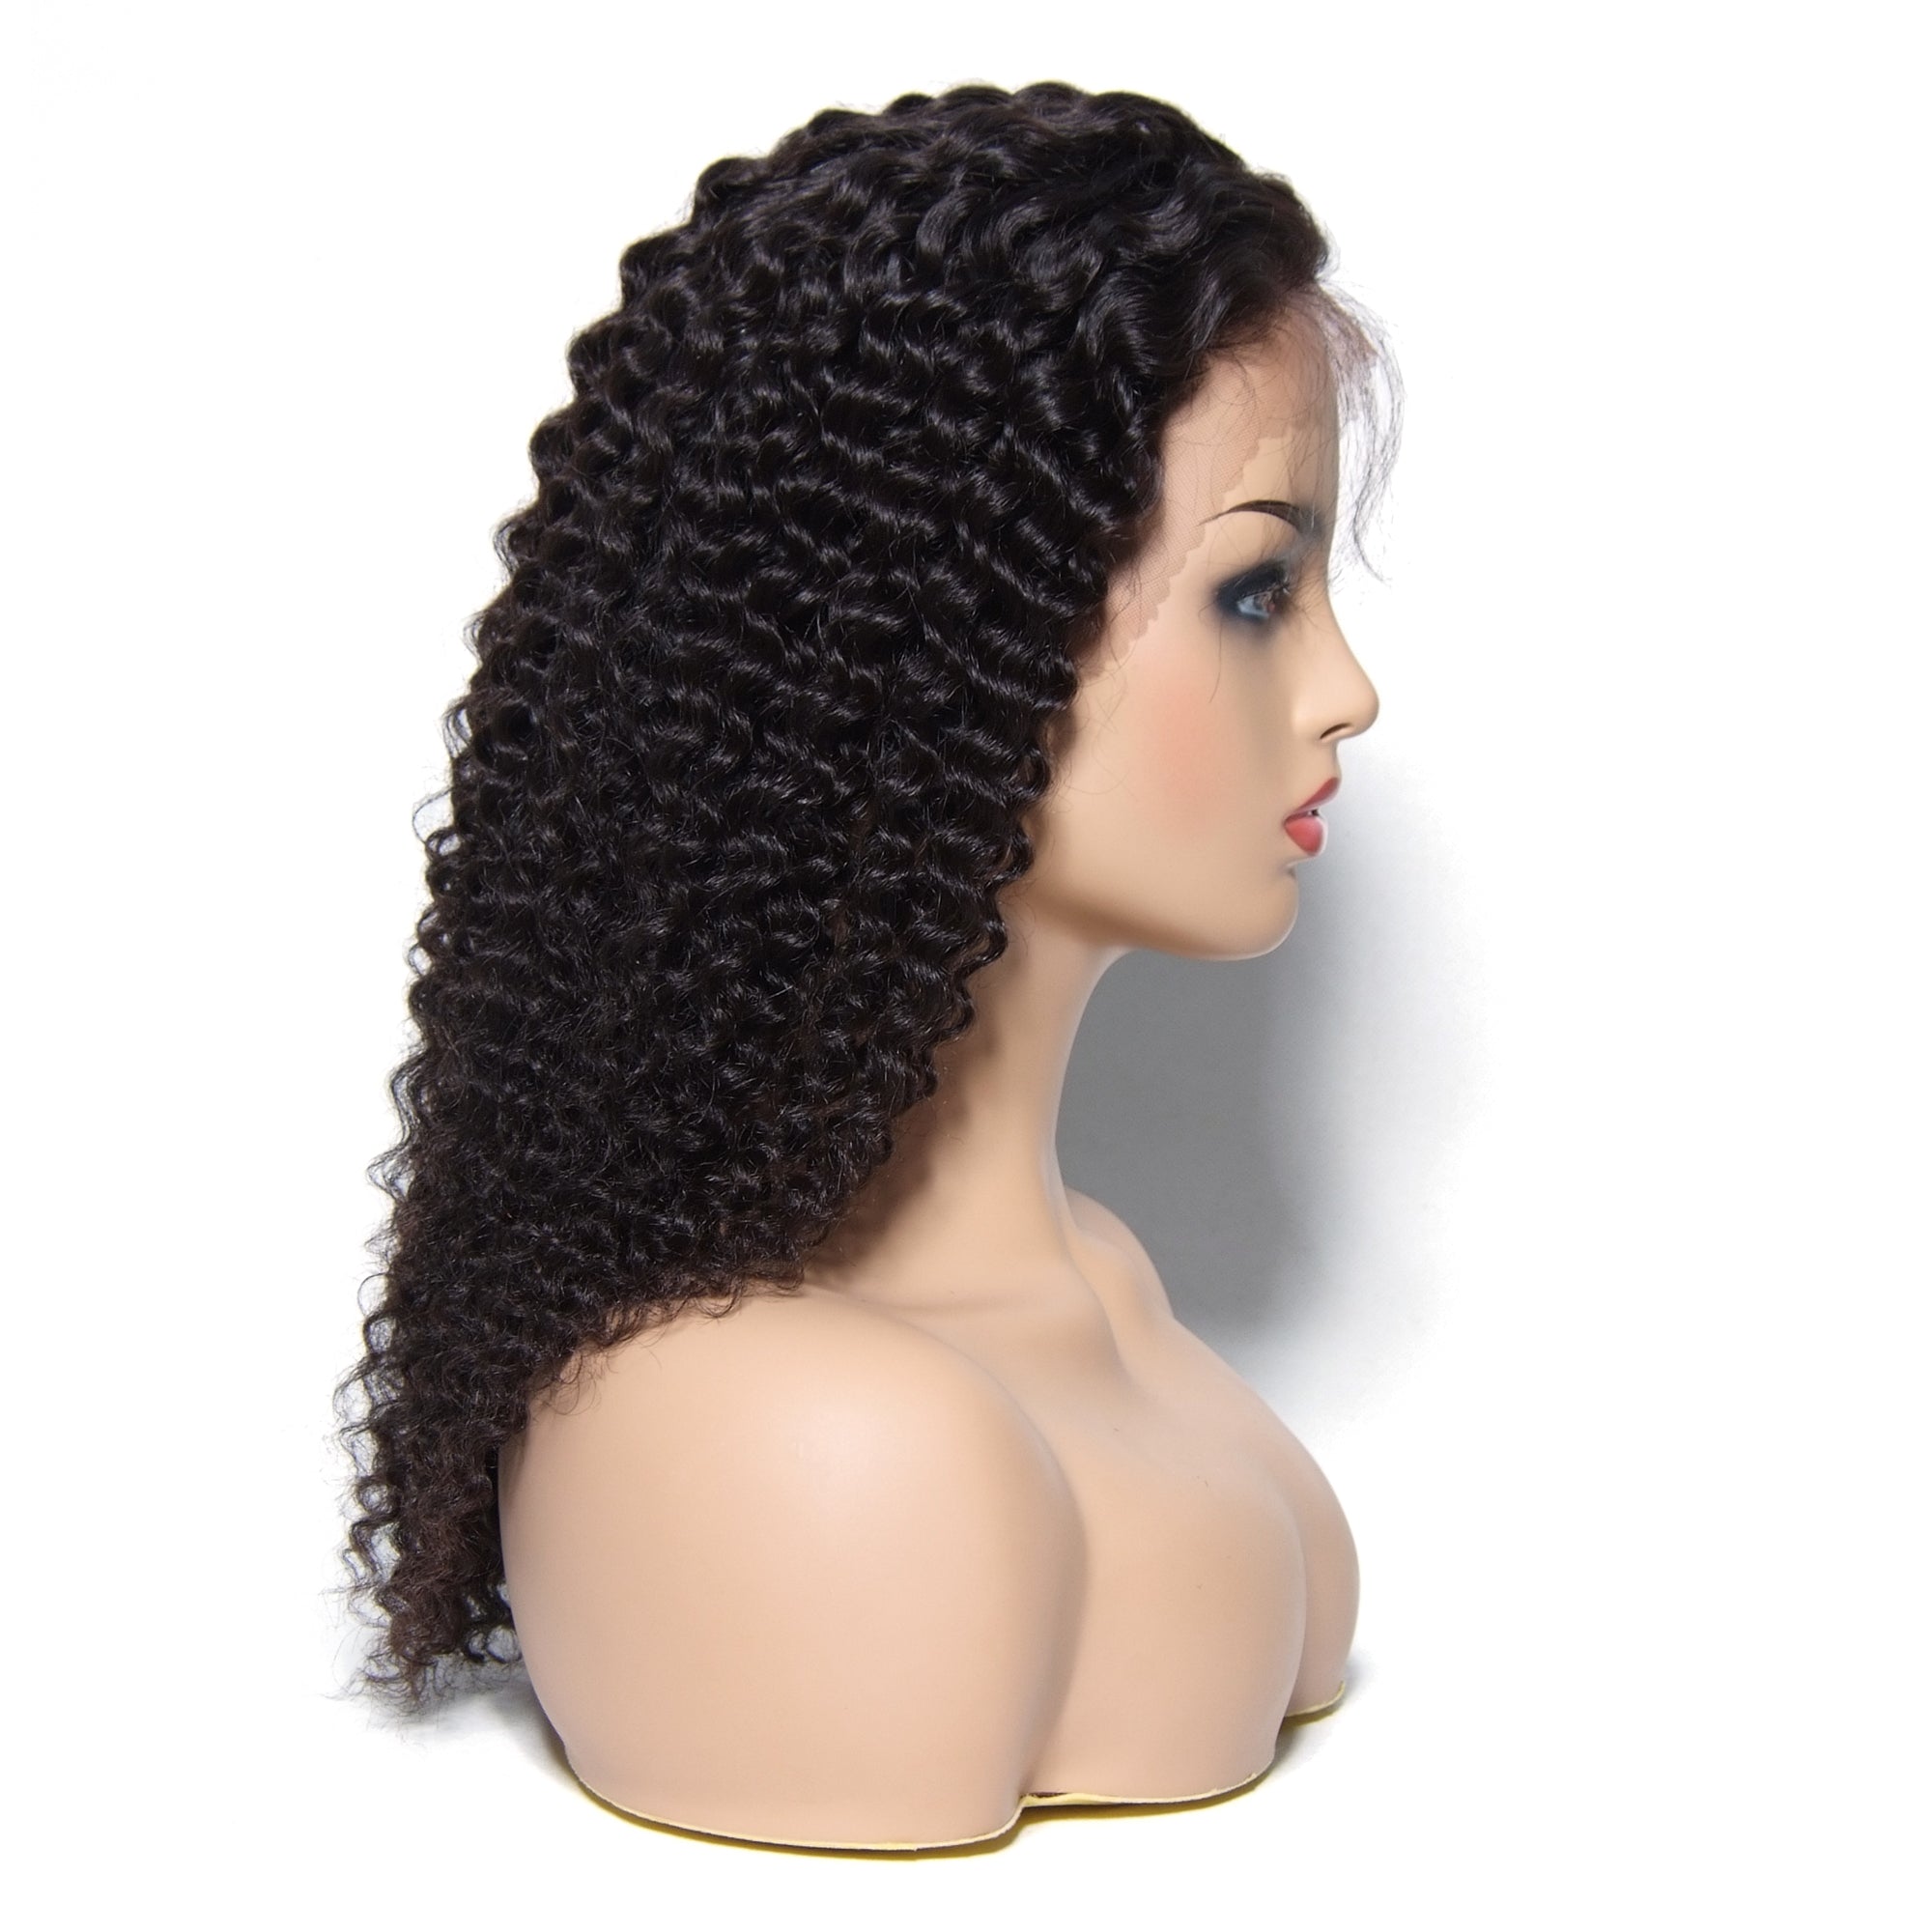 Msbeauty 180% Density Natural Hair Line Long Jerry Curl Lace Frontal Wig For Woman - MSBEAUTY HAIR